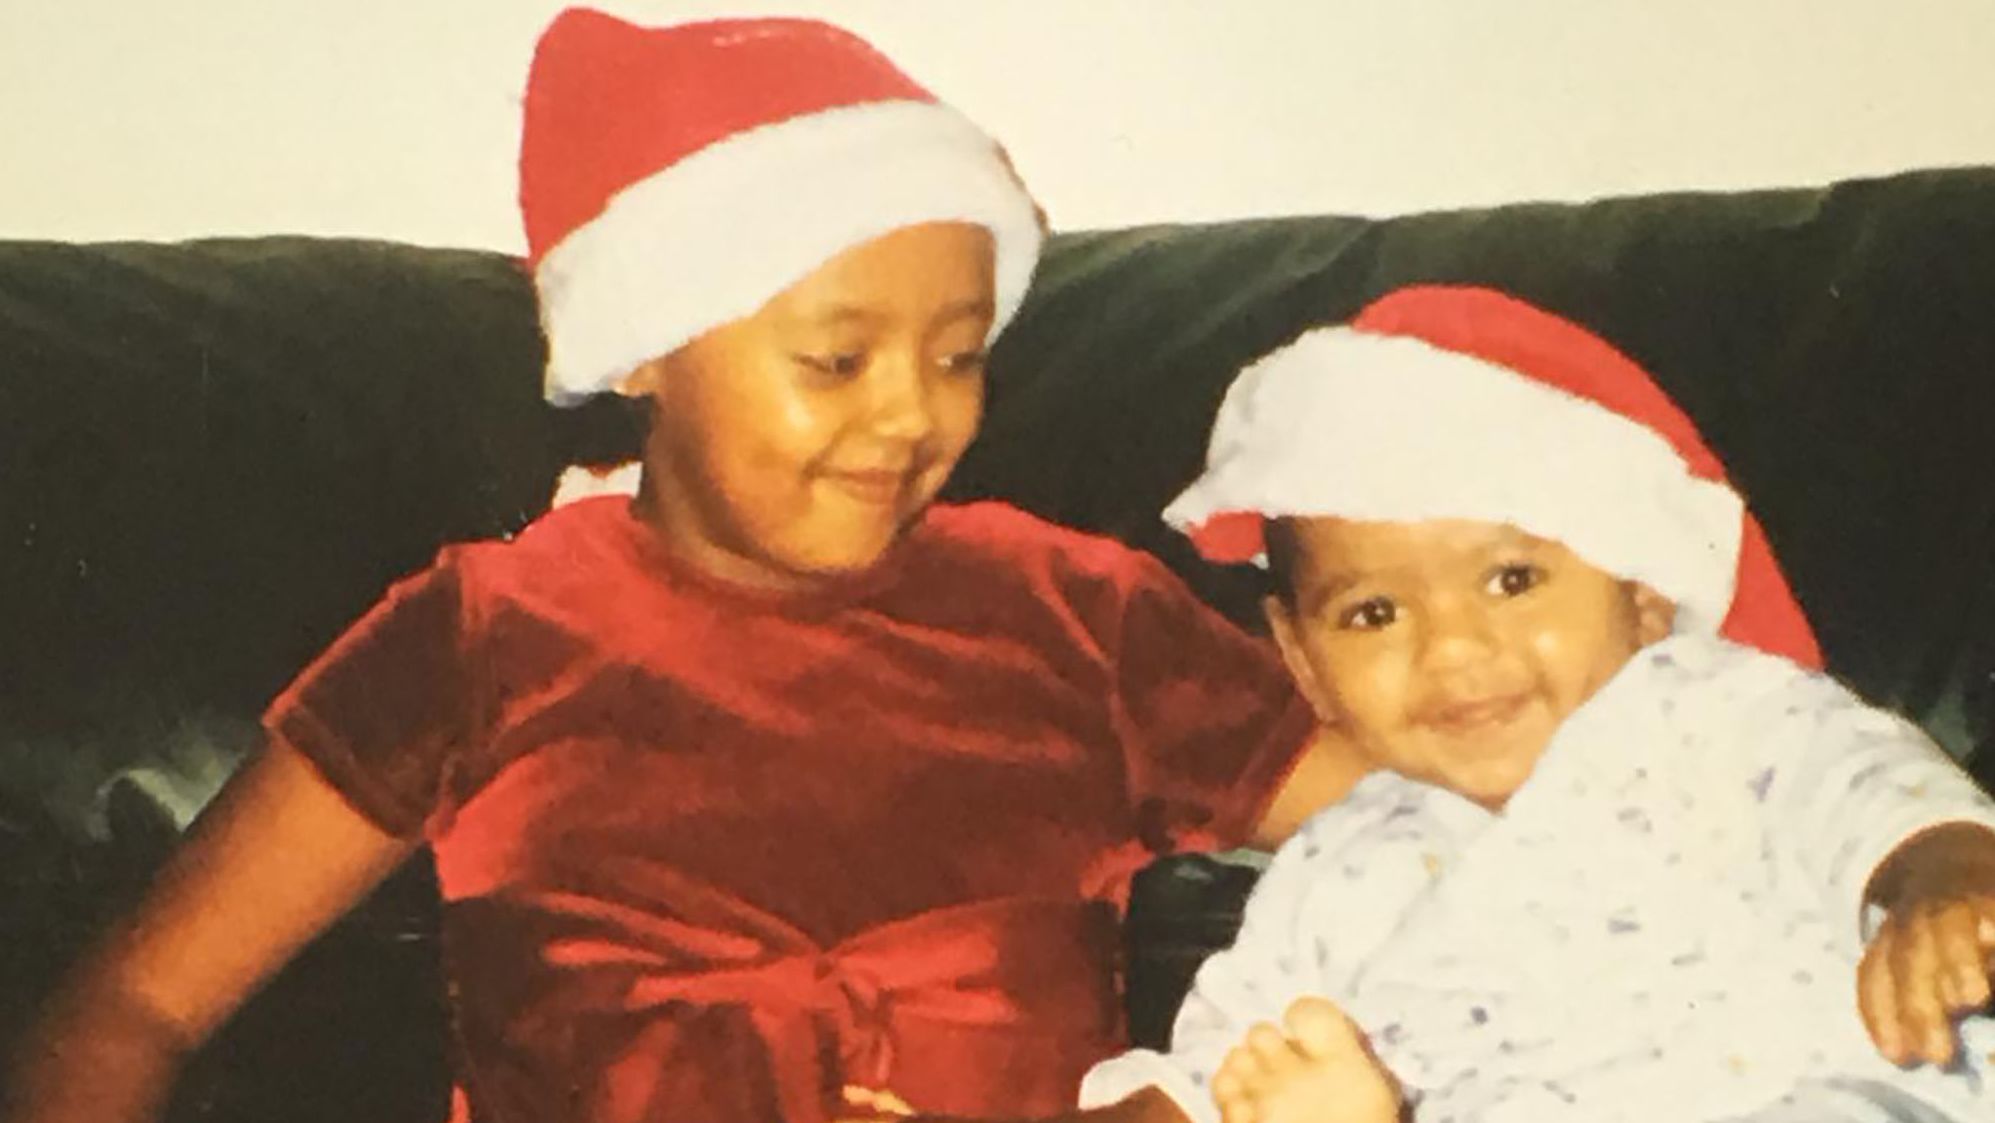 Ciham Ali Ahmed and her younger brother celebrate Christmas. 